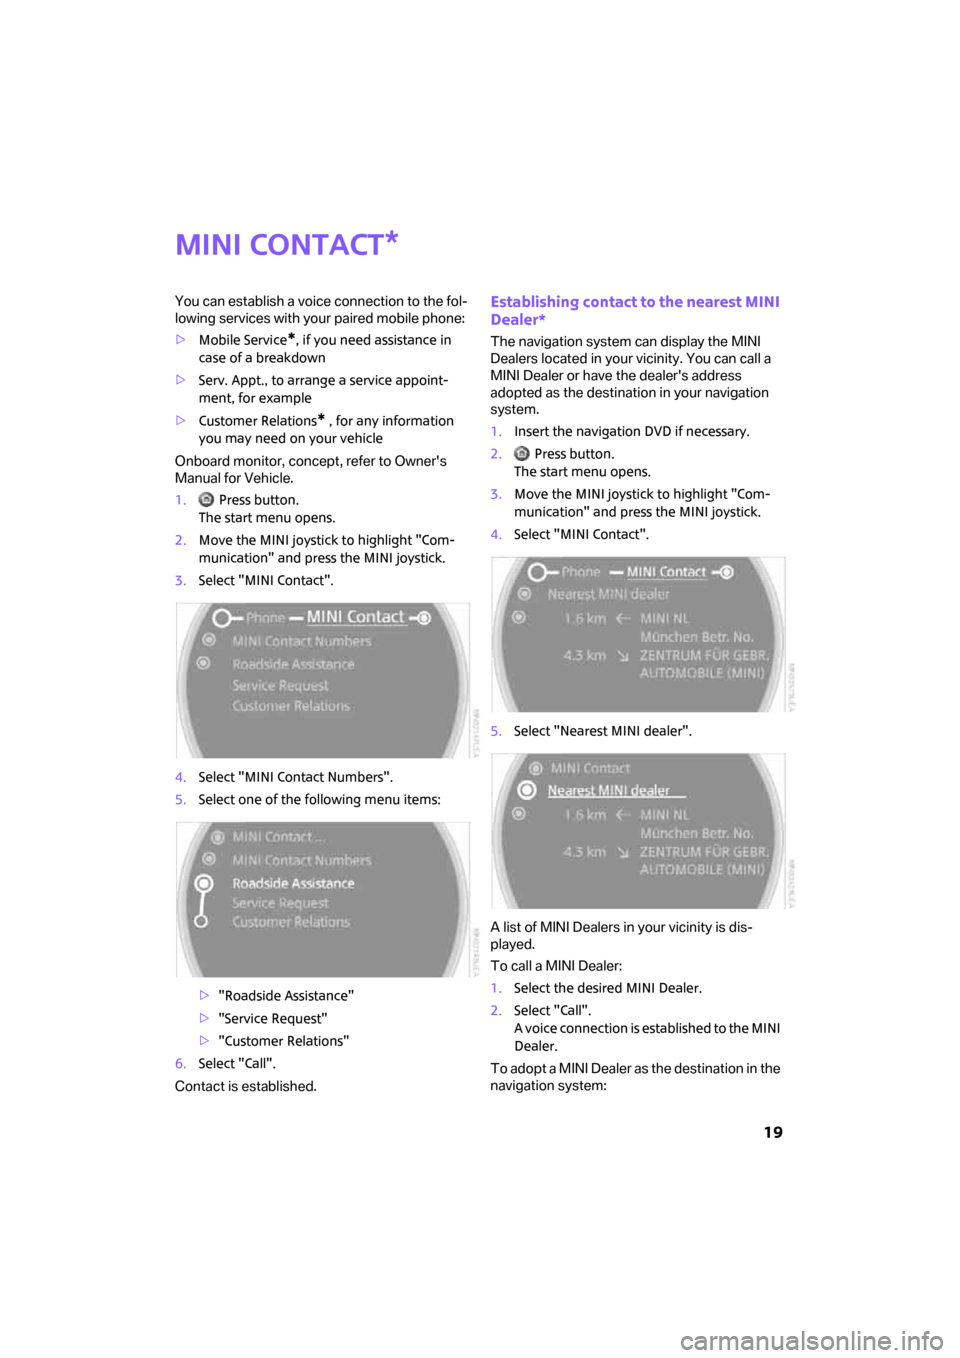 MINI Clubman 2008  Owners Manual (Mini Connected)  19
MINI contact
You can establish a voice connection to the fol-
lowing services with your paired mobile phone:
>Mobile Service
*, if you need assistance in 
case of a breakdown
>Serv. Appt., to arra